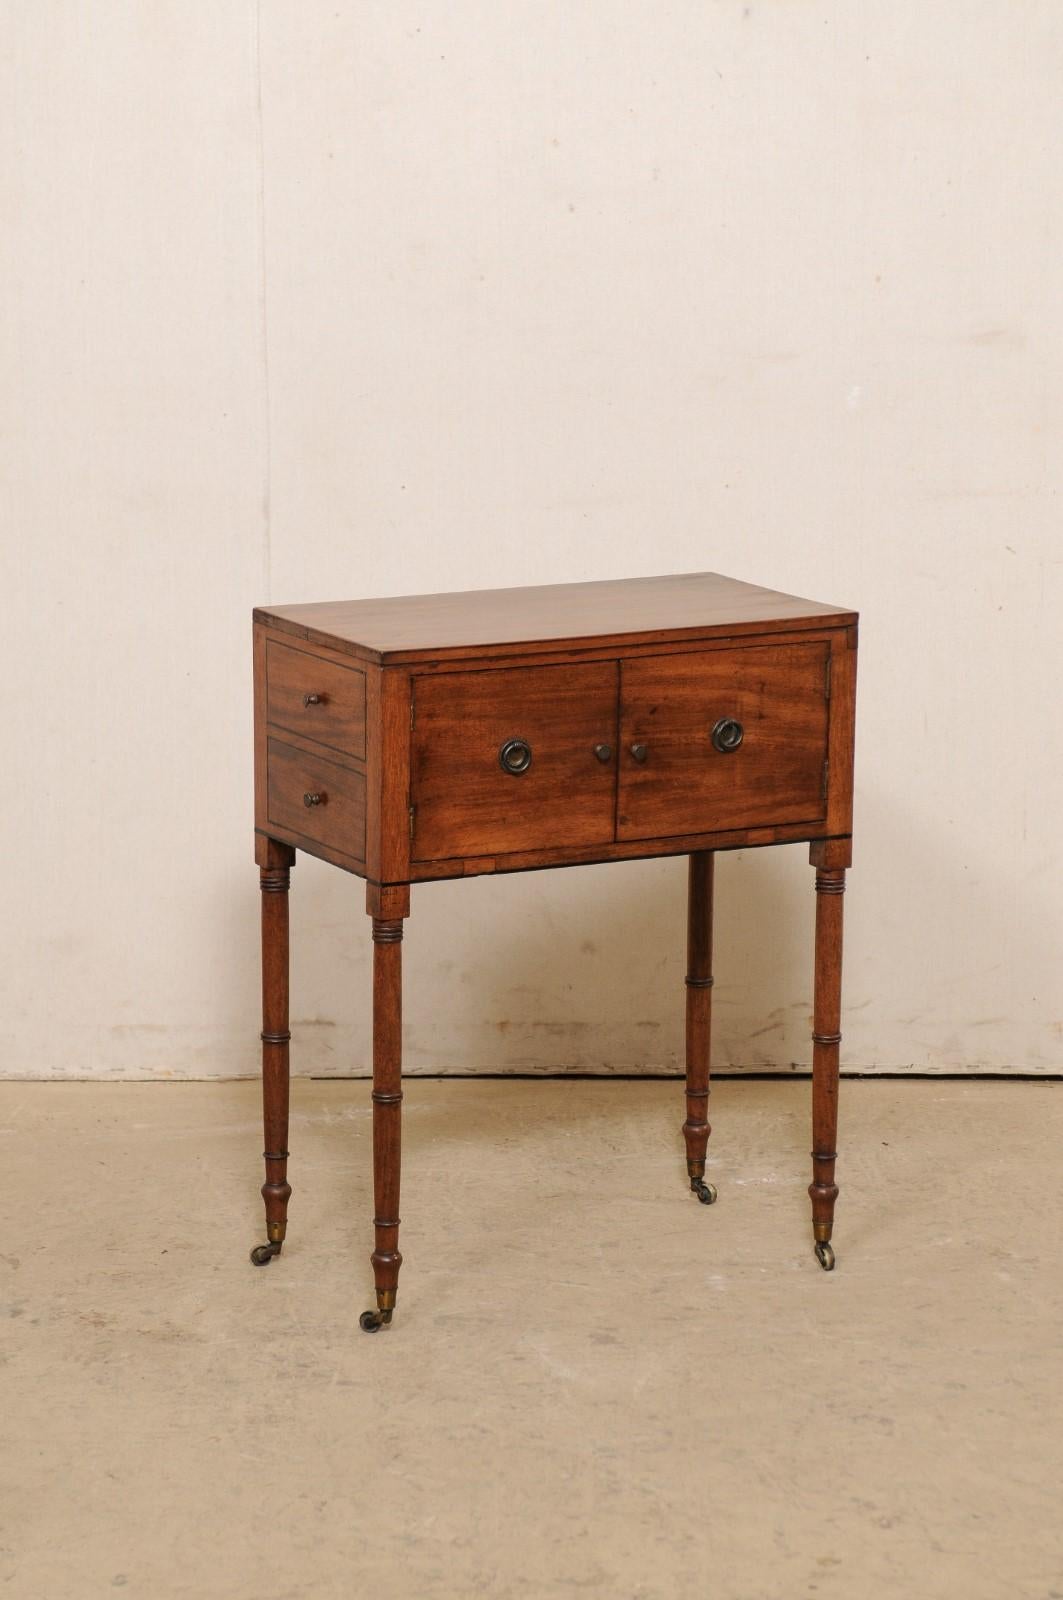 An English Regency side chest from the early 20th century. This antique side chest/end table from England features a rectangular-shaped case with pair of doors along one long side, which open to reveal hidden storage within, and each short end